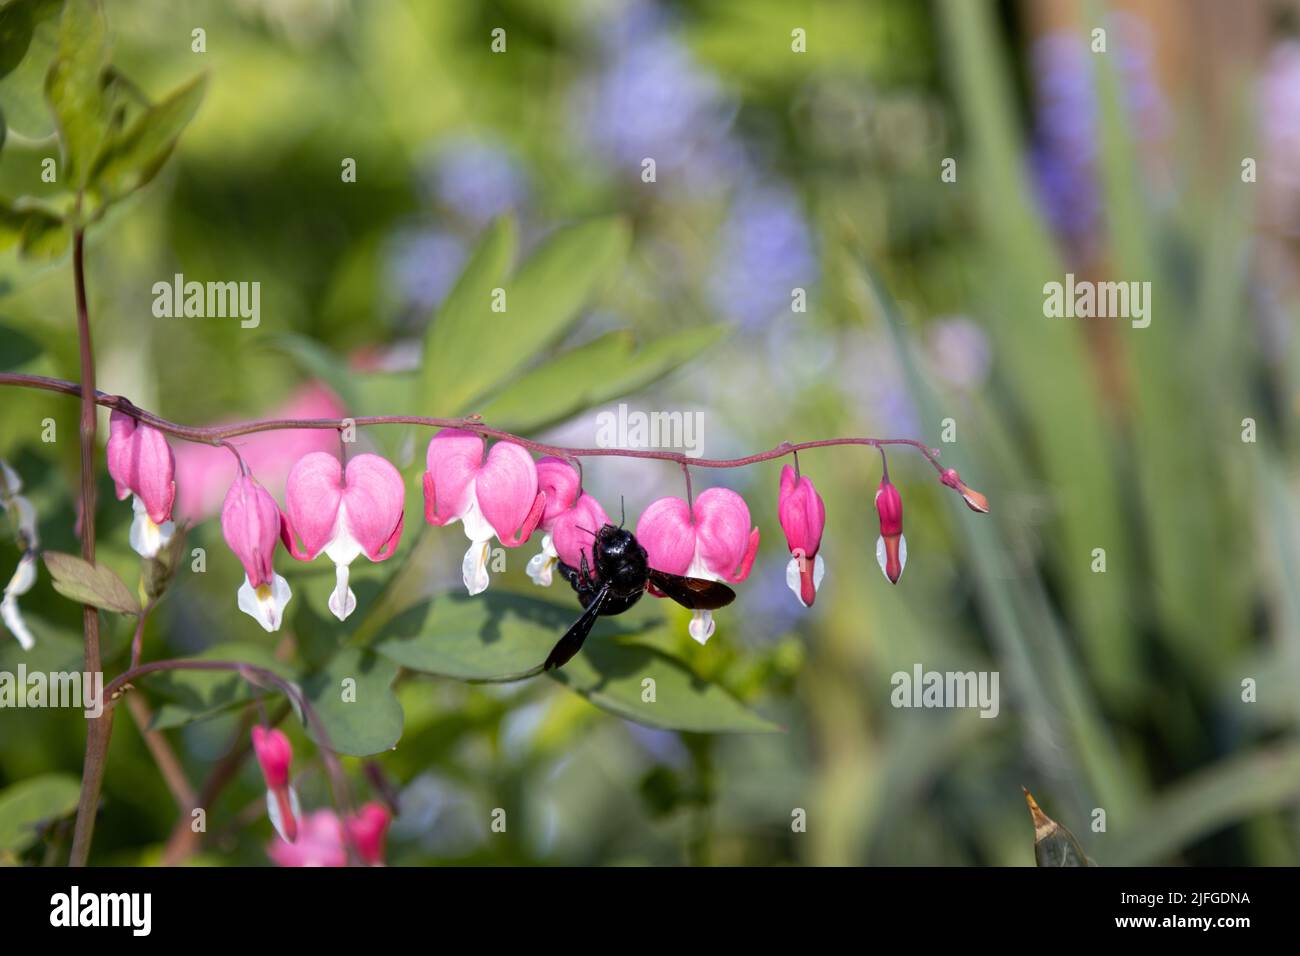 A big blue wood bee searches for pollen on a heart flower,Lamprocapnos spectabilis. Stock Photo